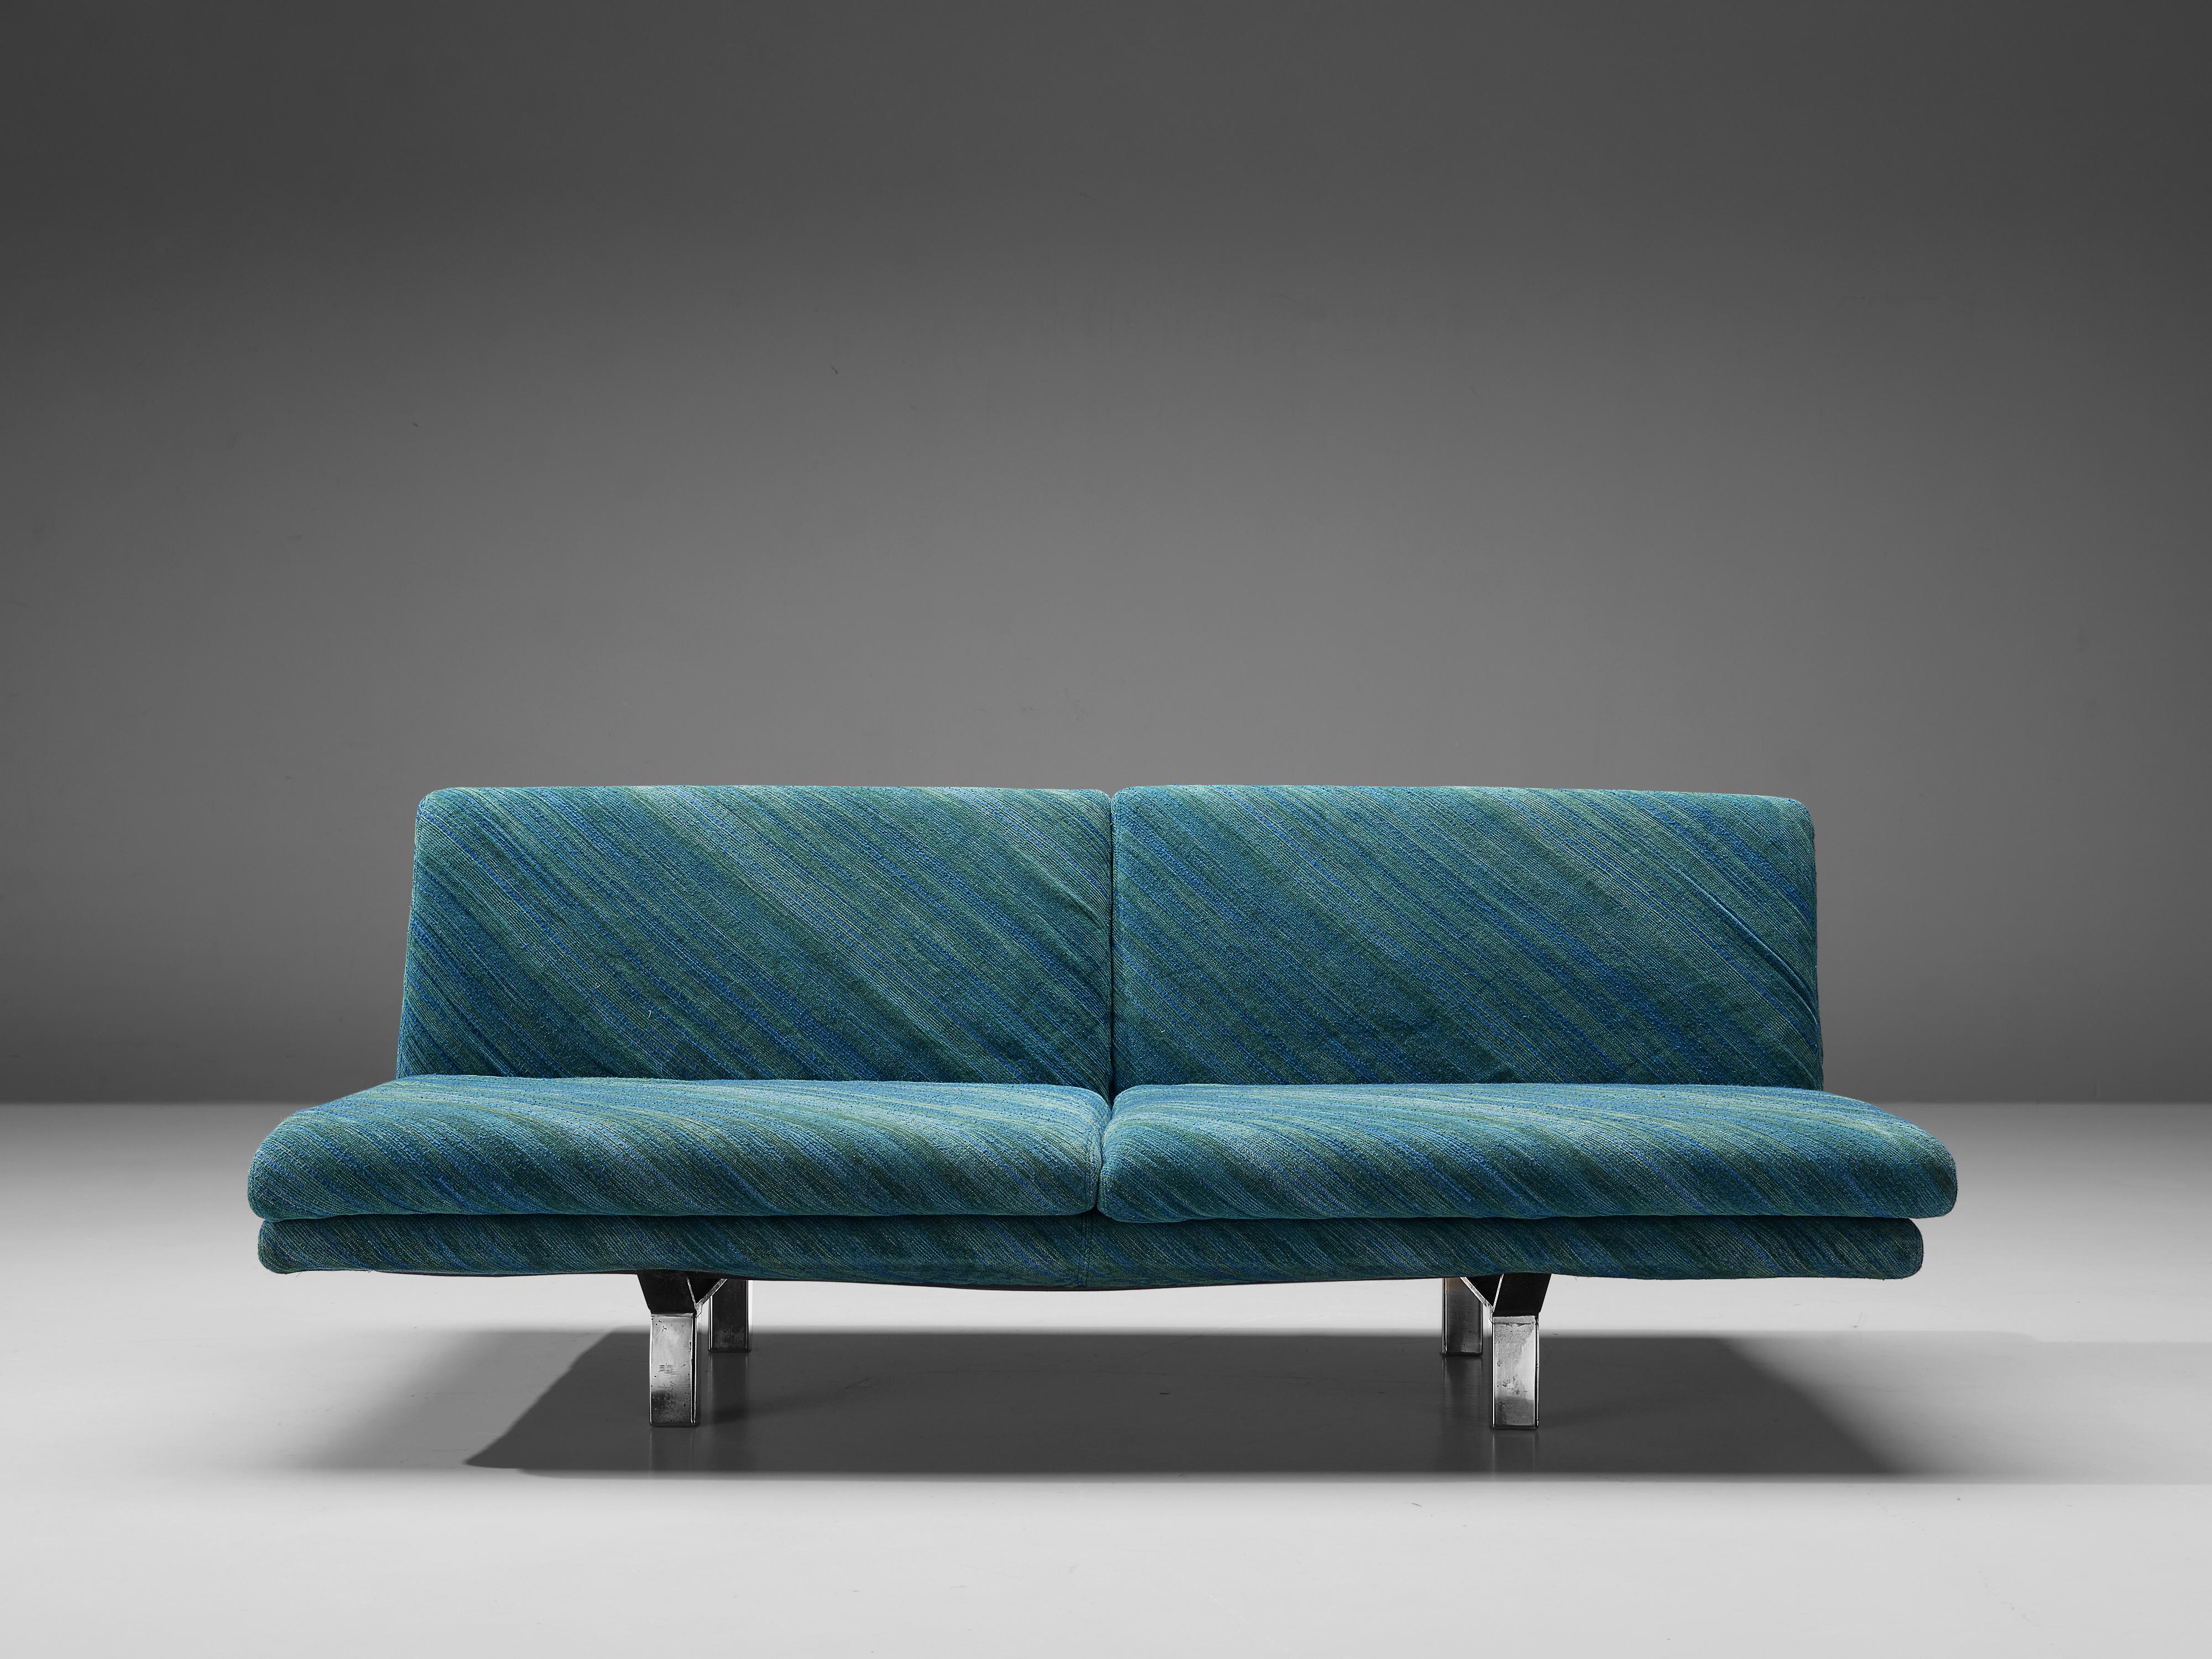 Metal Saporiti Two Seat Sofa with Ottoman in Green-Blue Upholstery 